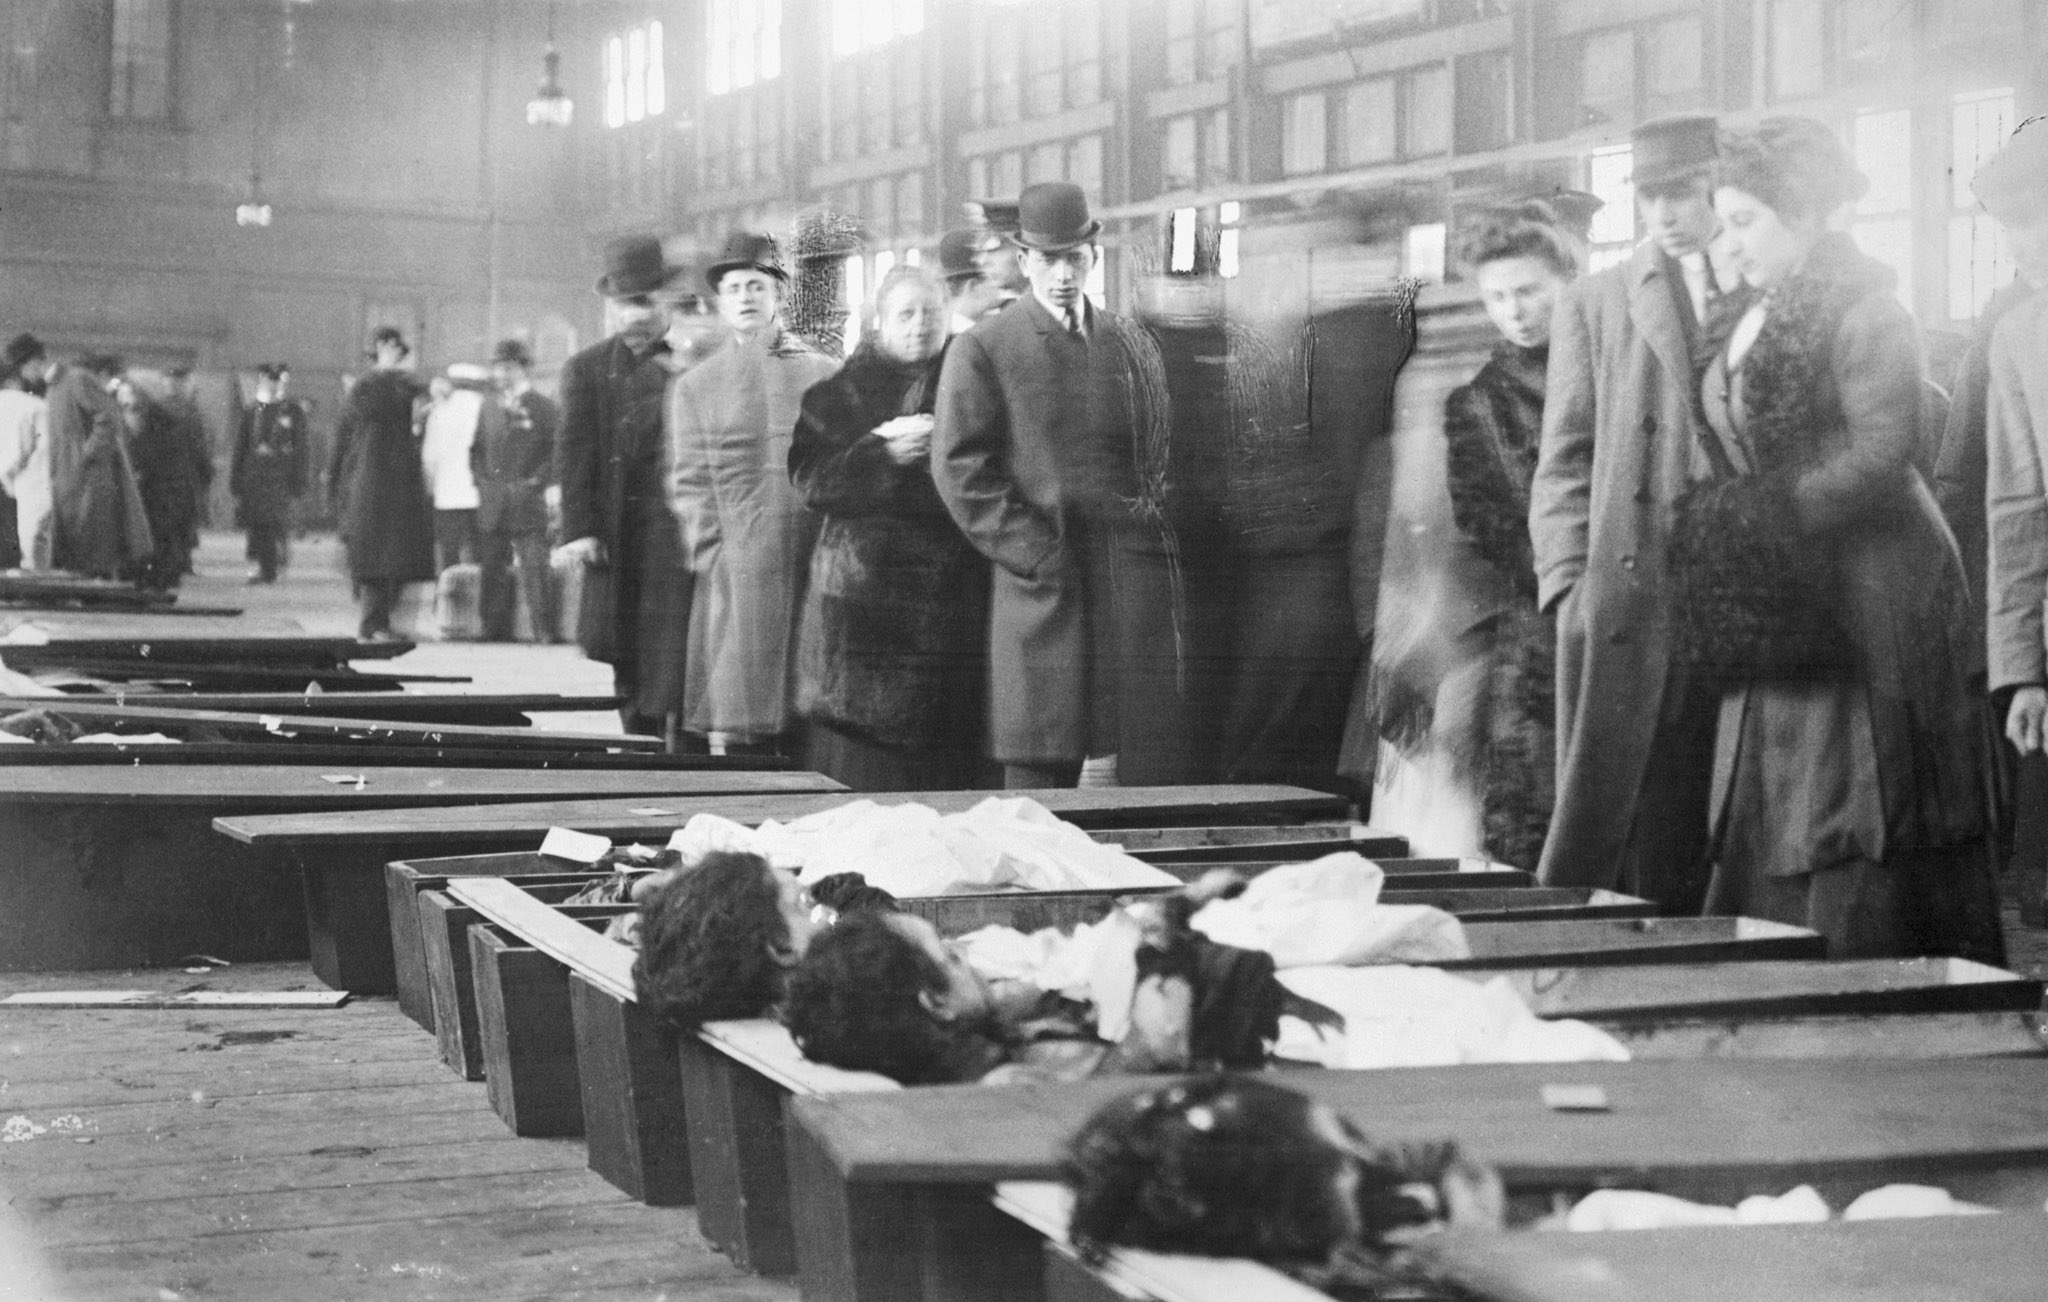 110 Years Ago Today, The Triangle Shirtwaist Factory Fire in New York City kills 146 garment workers, mostly women, due to a lack of safety regulations. The public nature of the victims’ deaths (most died by jumping to death) led to sweeping safety reforms.